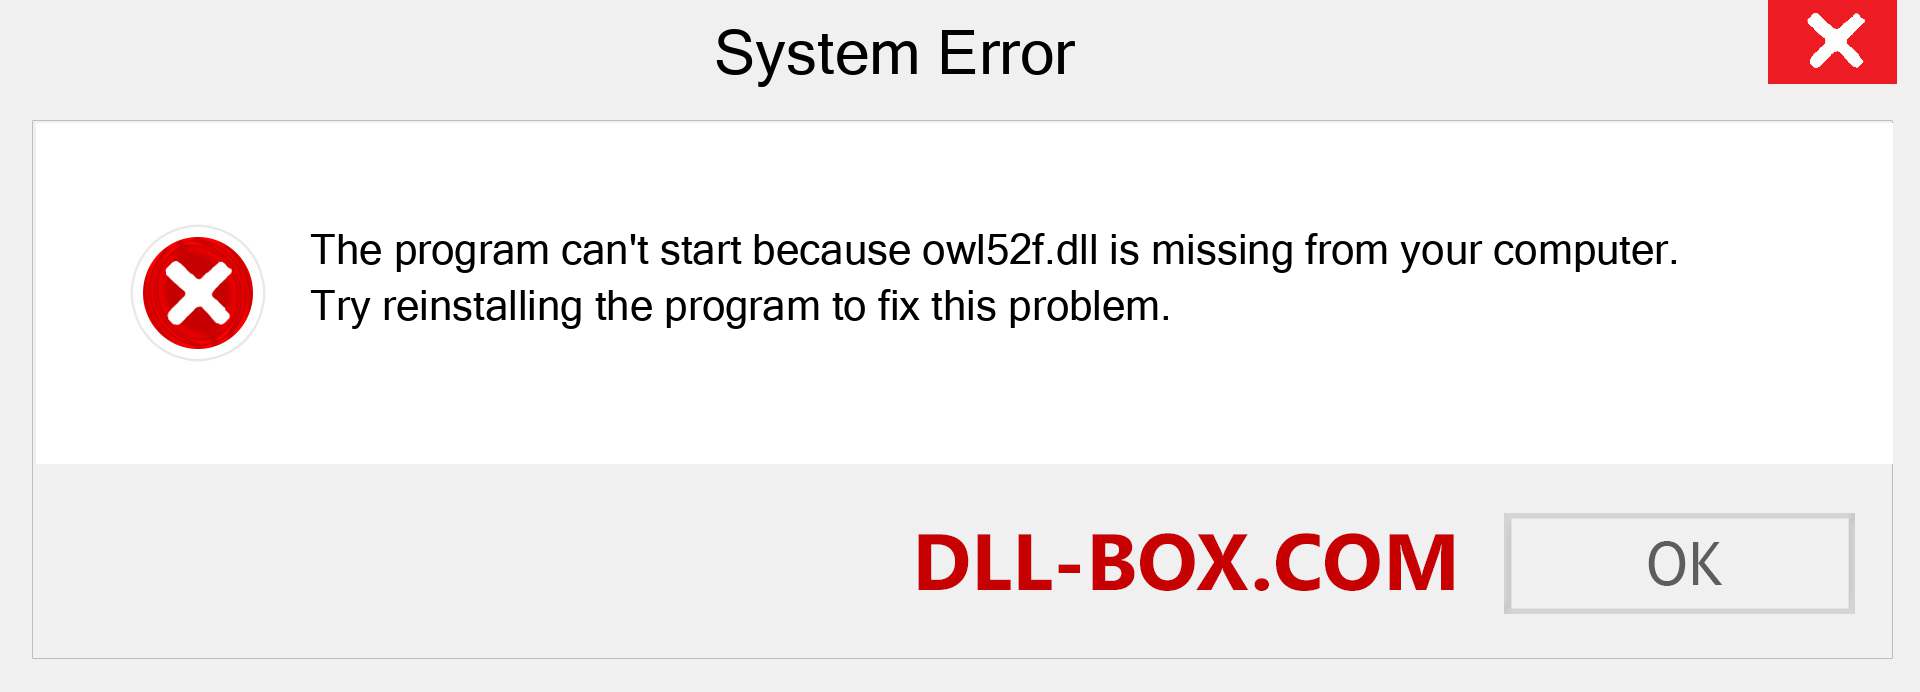  owl52f.dll file is missing?. Download for Windows 7, 8, 10 - Fix  owl52f dll Missing Error on Windows, photos, images